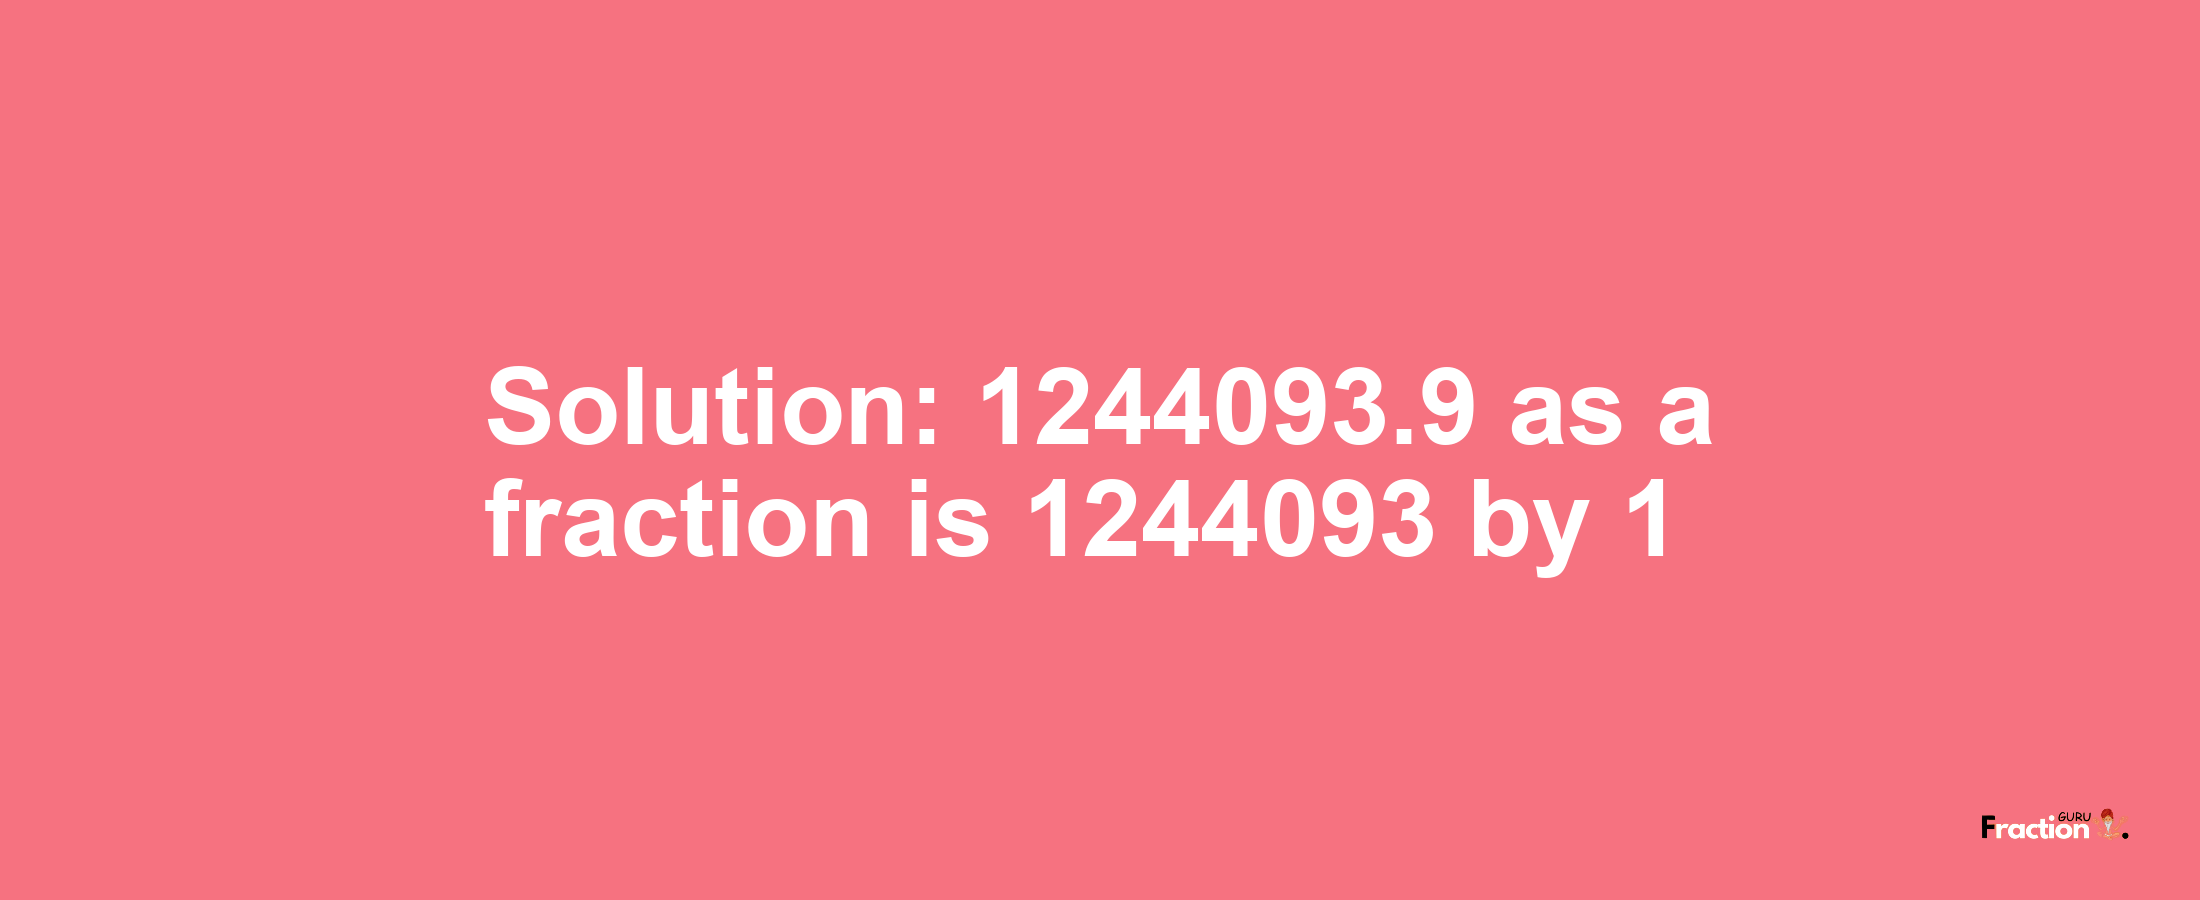 Solution:1244093.9 as a fraction is 1244093/1